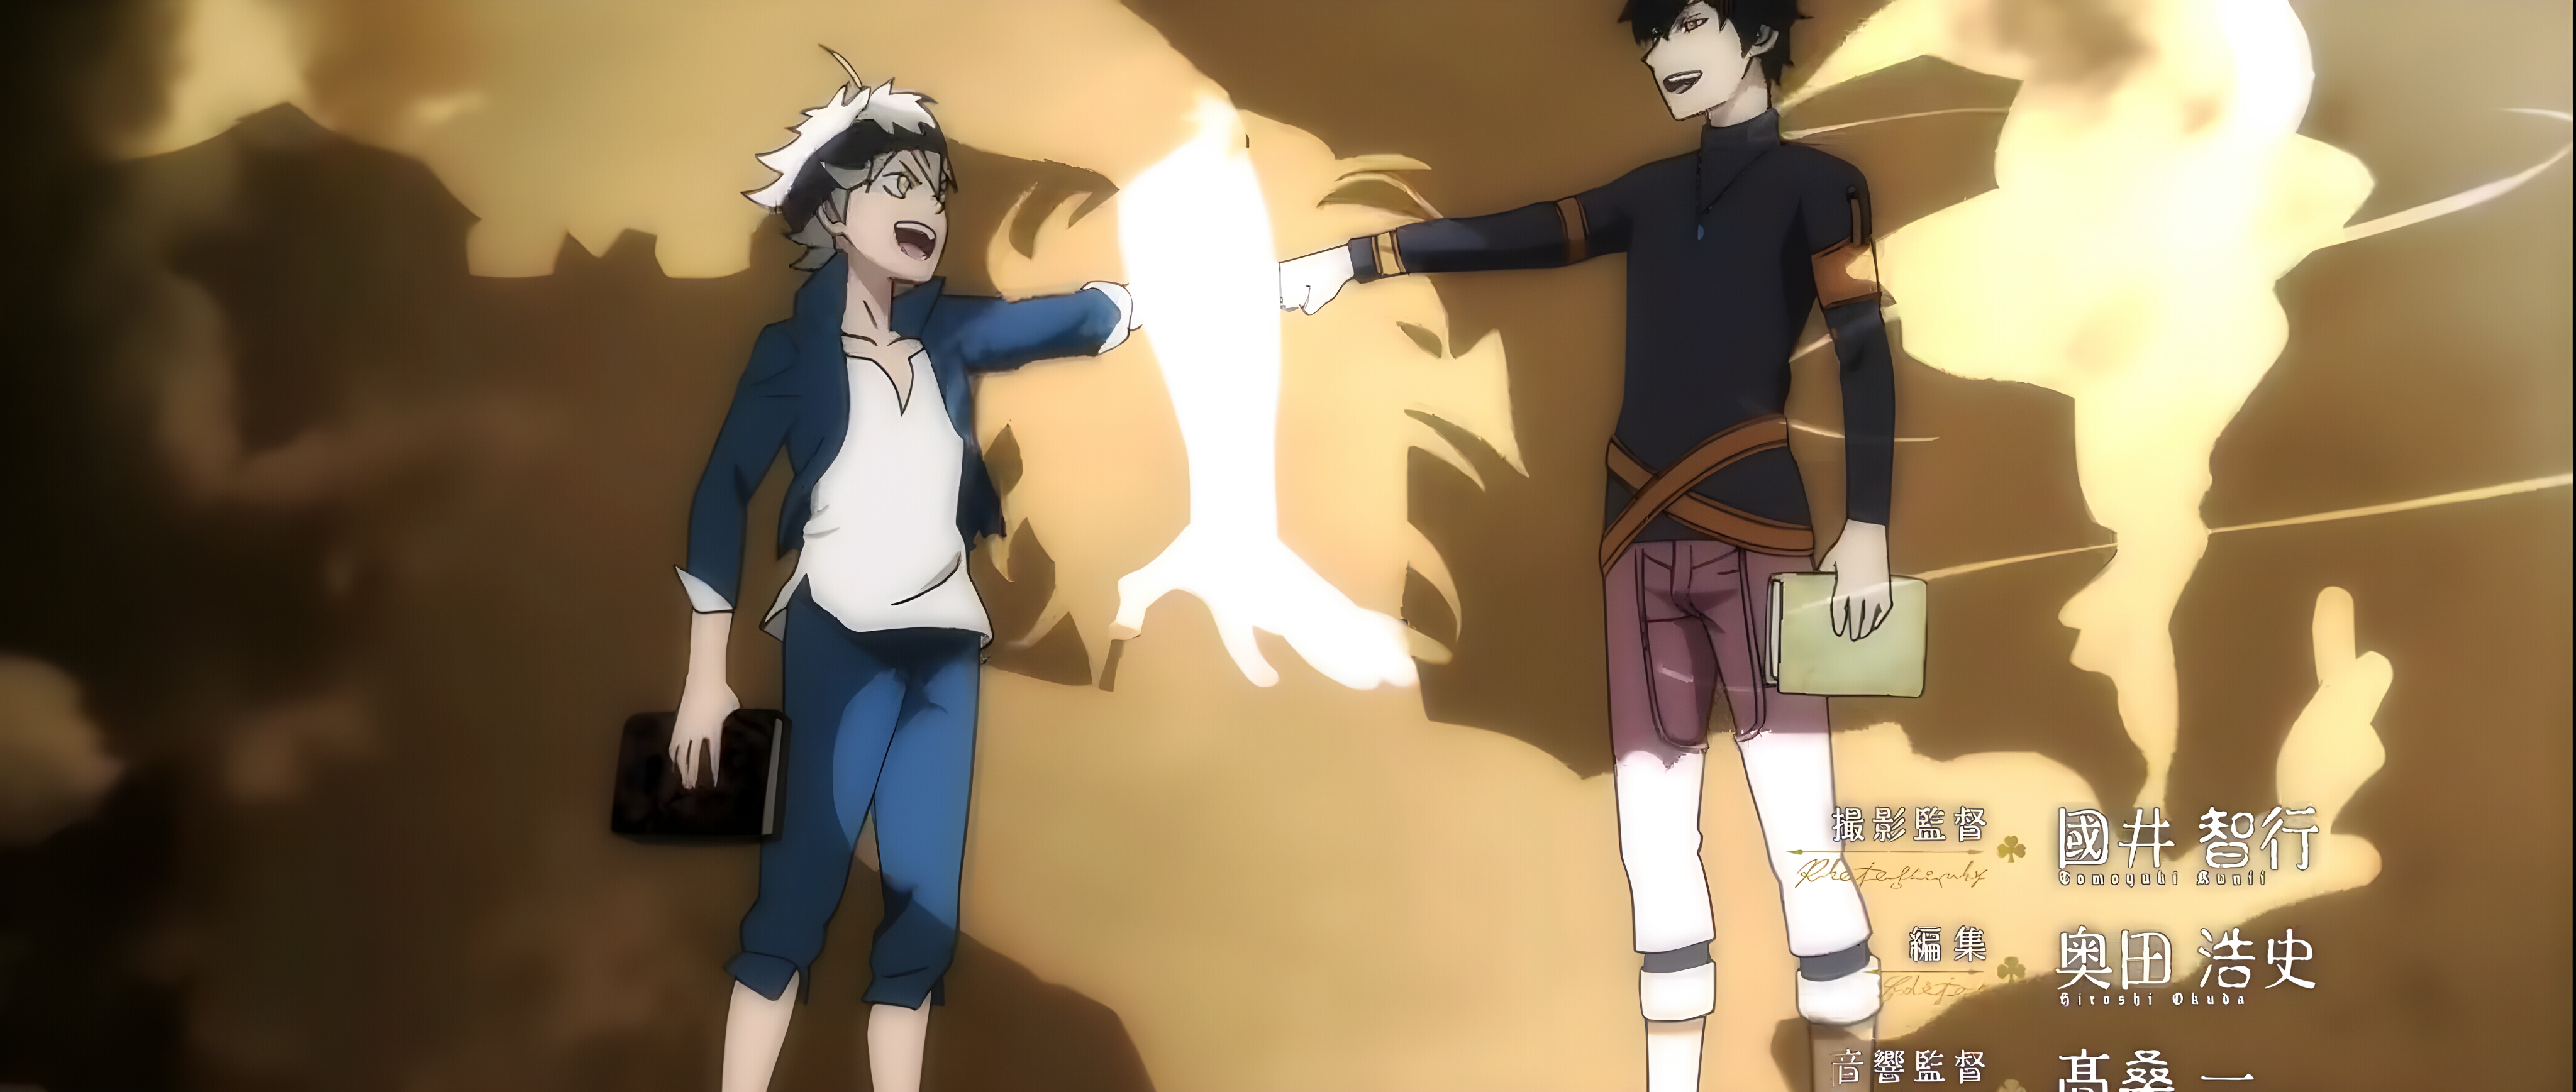 Anime Black Clover Picture